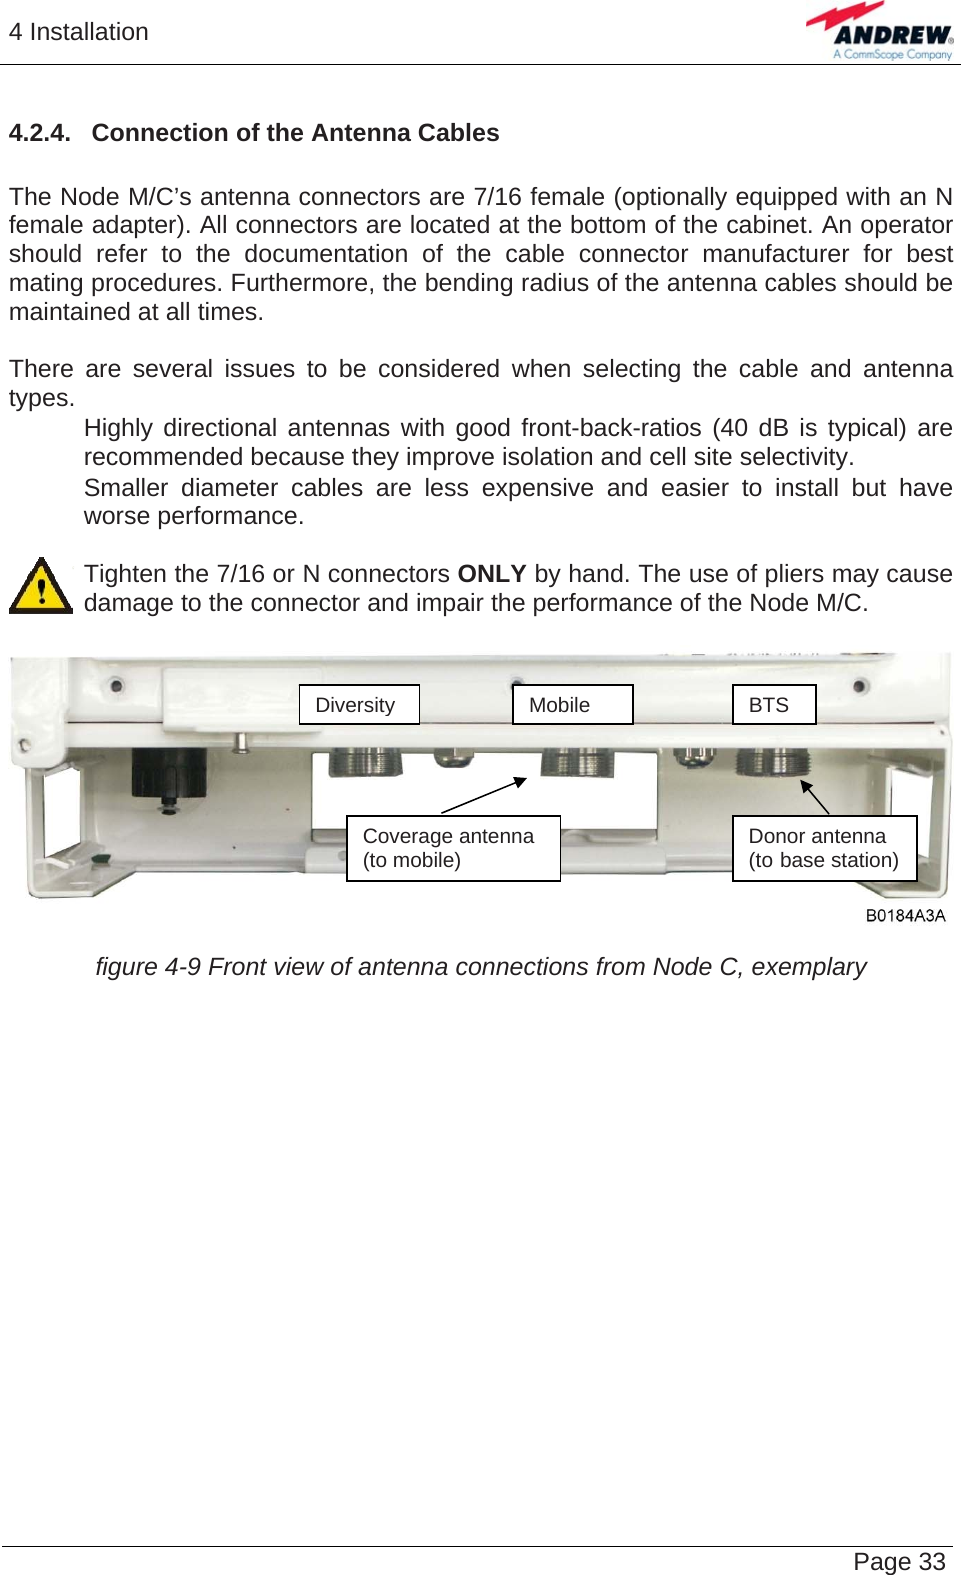 4 Installation   Page 334.2.4.  Connection of the Antenna Cables   The Node M/C’s antenna connectors are 7/16 female (optionally equipped with an N female adapter). All connectors are located at the bottom of the cabinet. An operator should refer to the documentation of the cable connector manufacturer for best mating procedures. Furthermore, the bending radius of the antenna cables should be maintained at all times.  There are several issues to be considered when selecting the cable and antenna types.    Highly directional antennas with good front-back-ratios (40 dB is typical) are recommended because they improve isolation and cell site selectivity.    Smaller diameter cables are less expensive and easier to install but have worse performance.  Tighten the 7/16 or N connectors ONLY by hand. The use of pliers may cause damage to the connector and impair the performance of the Node M/C.   DiversityMobile BTS Coverage antenna (to mobile)  Donor antenna (to base station) figure 4-9 Front view of antenna connections from Node C, exemplary   